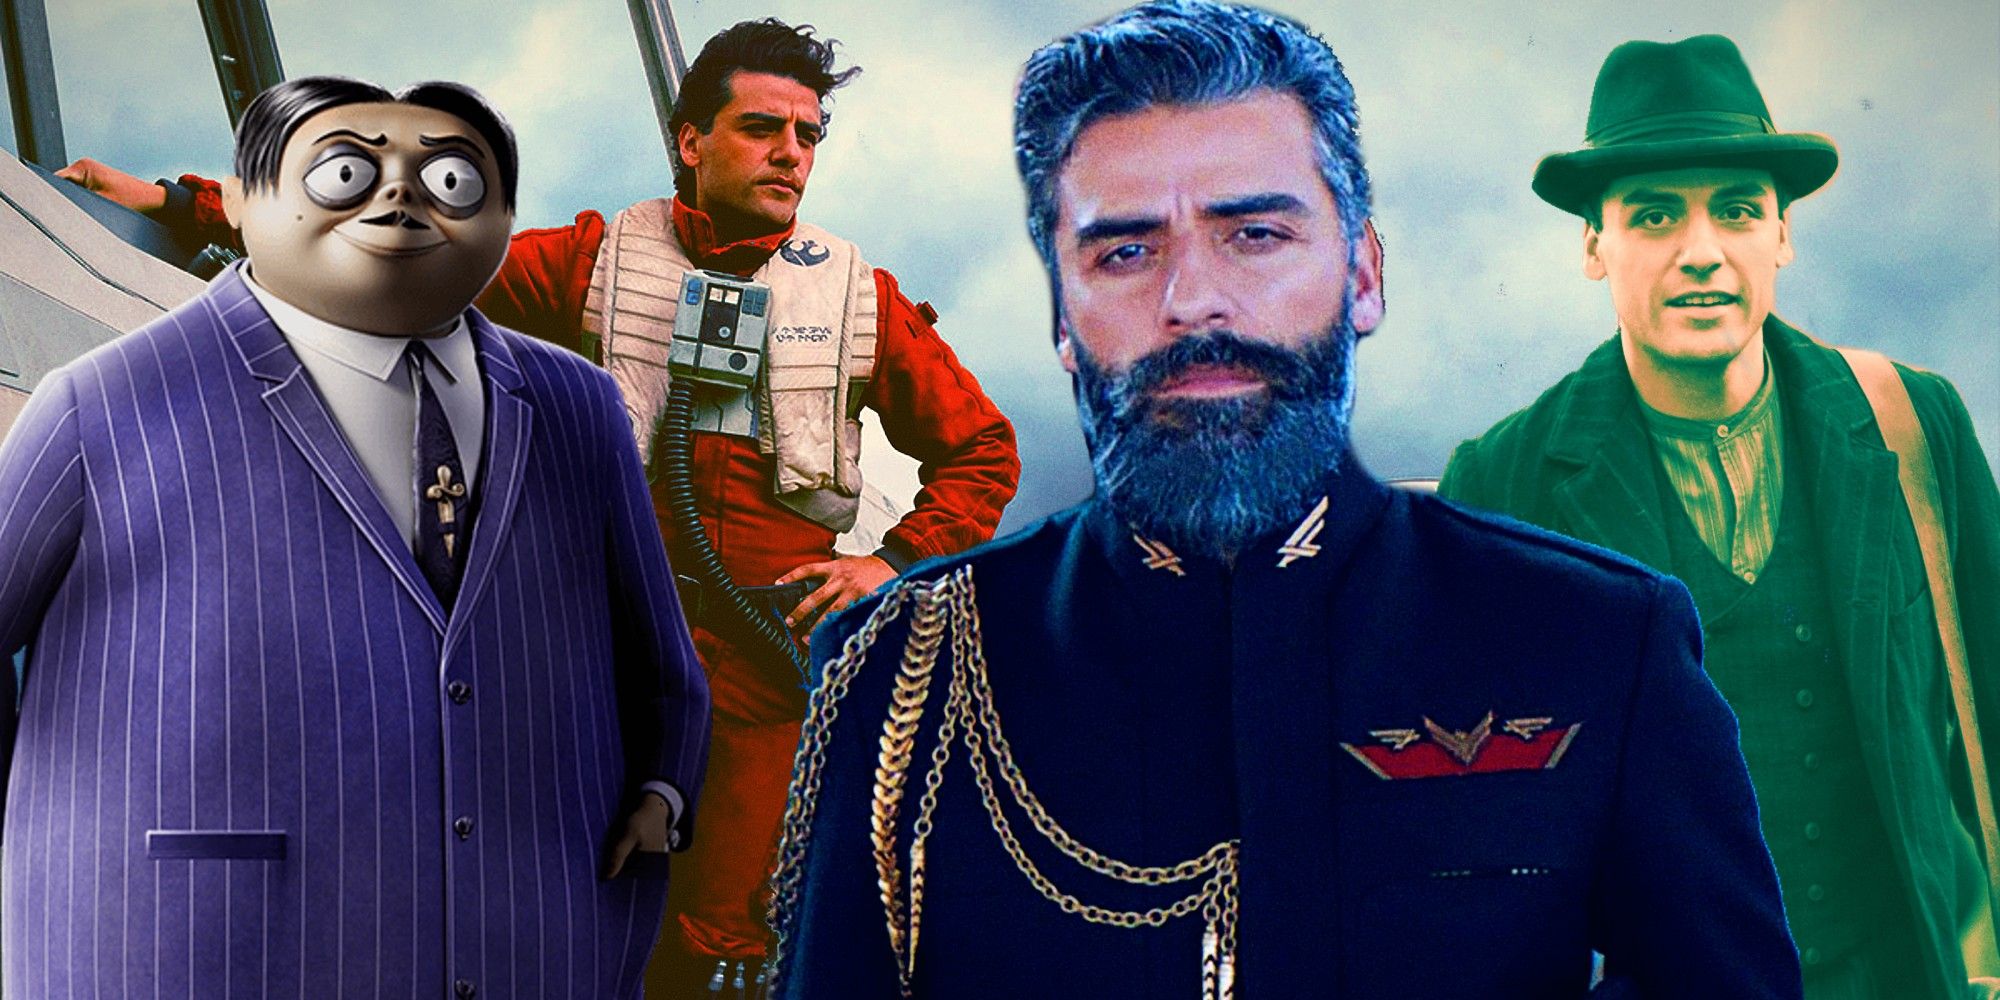 Collage of Oscar Isaac images featuring his roles in Addams Family, Star Wars, Dune and The Promise.